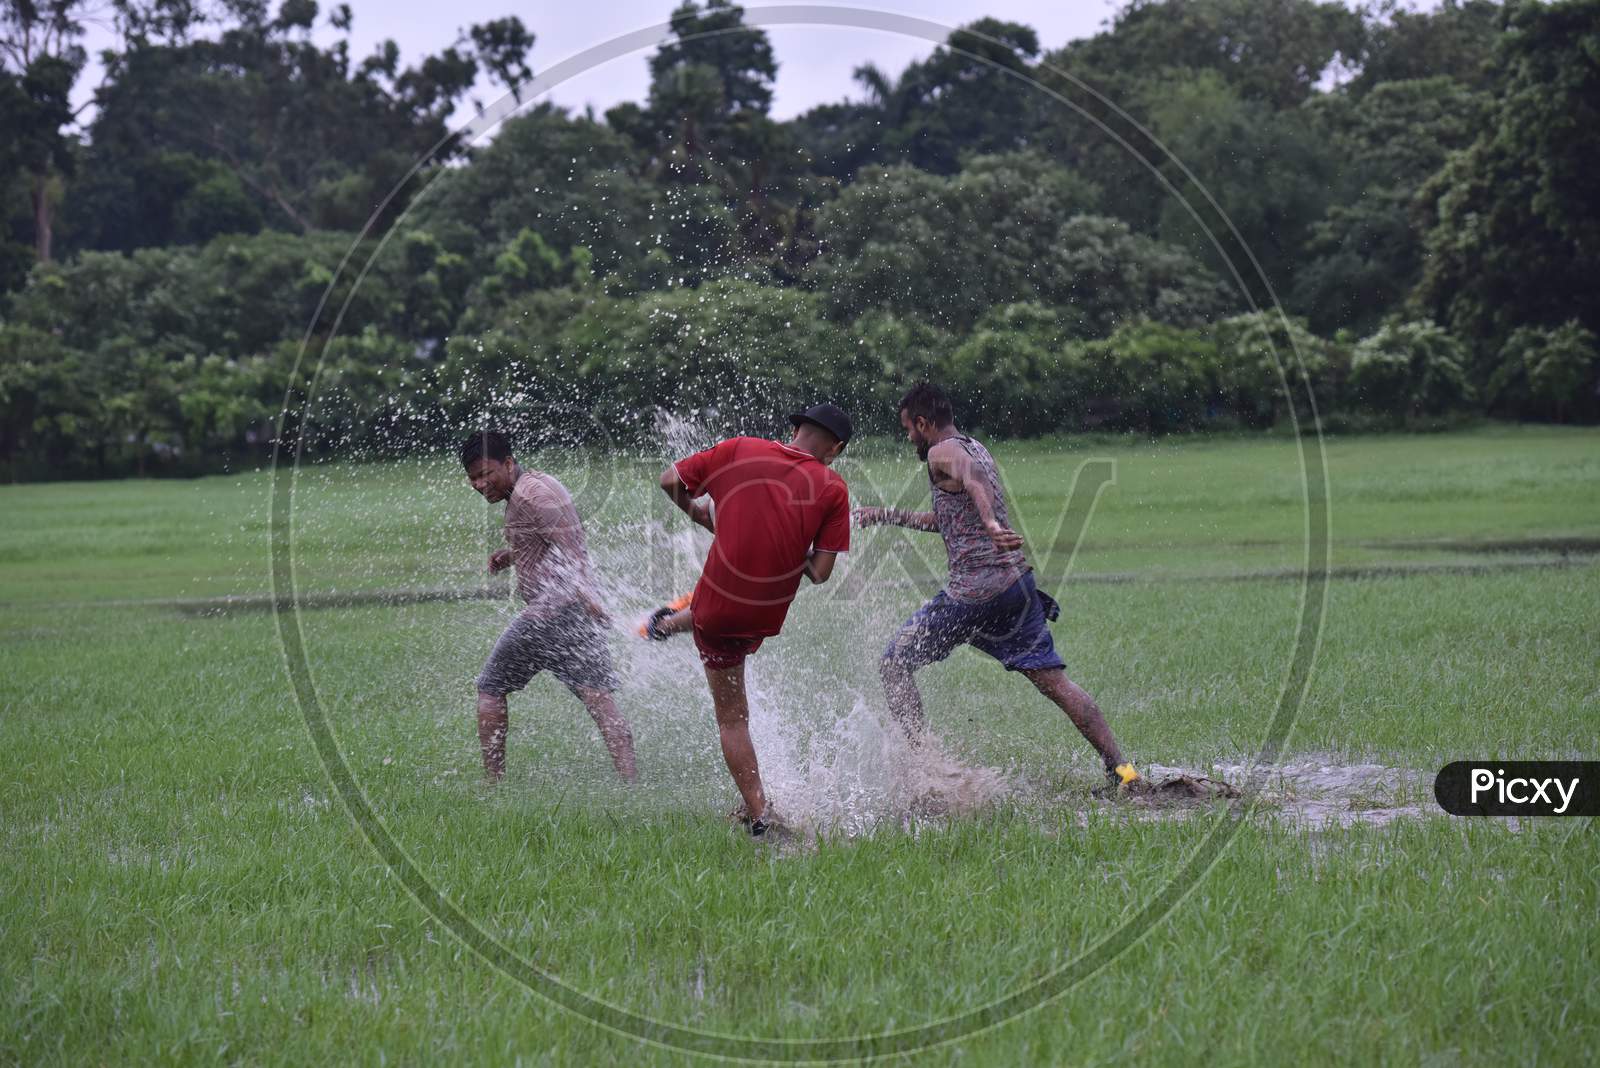 Indian boys playing with football in the rain